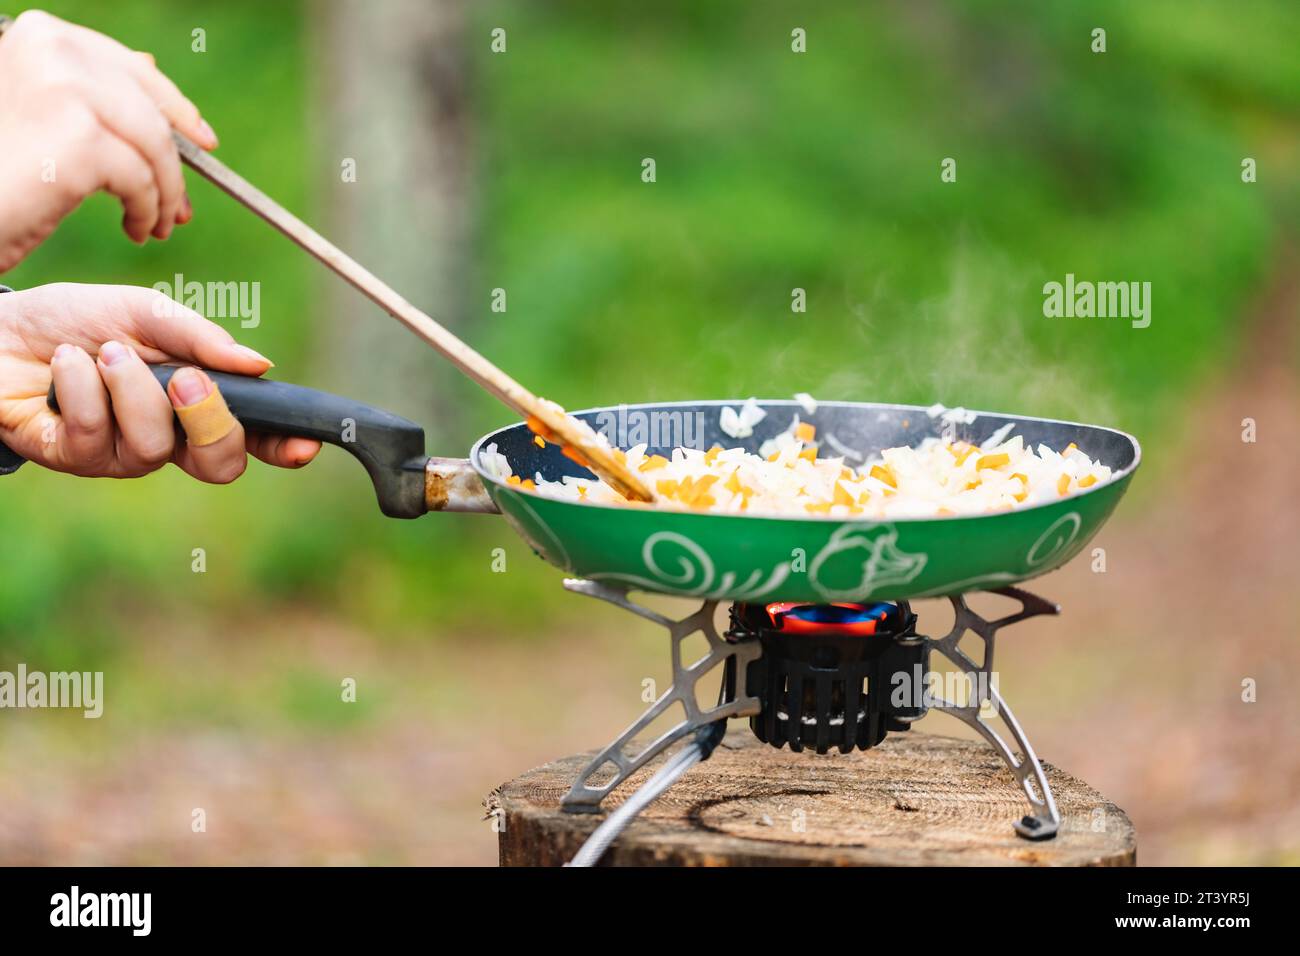 Cooking meal in a pan on a portable stove during wild camping in a forest Stock Photo